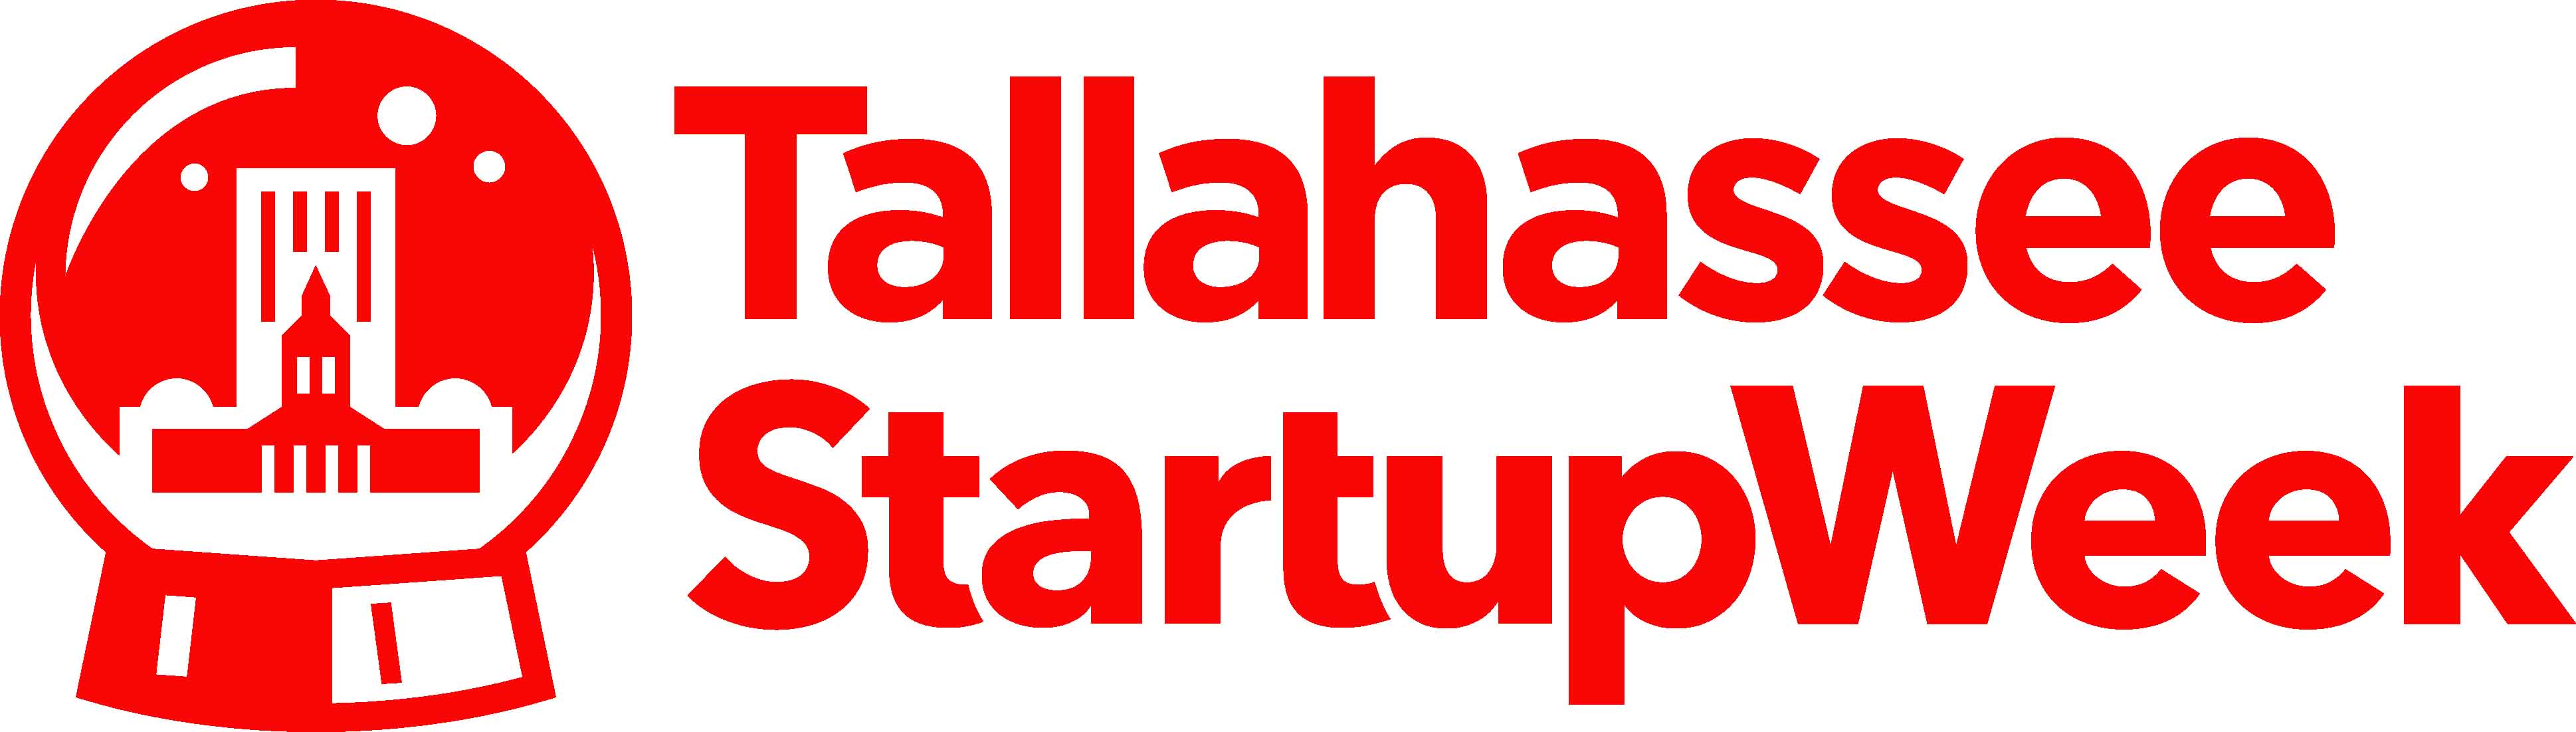 Tallahassee Startup Week is here